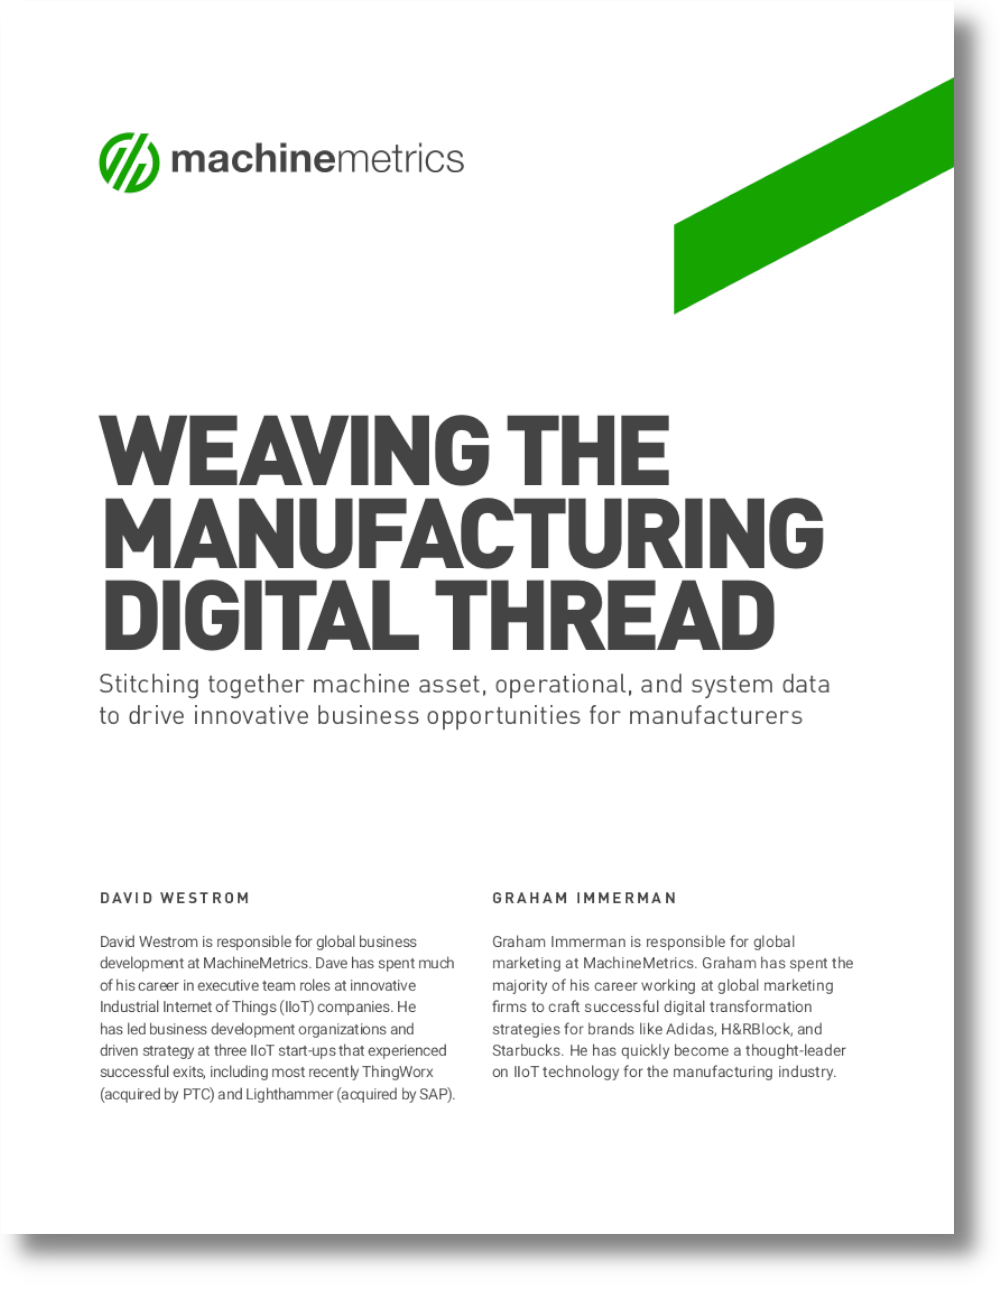 weaving-manufacturing-digital-thread-whitepaper-cover